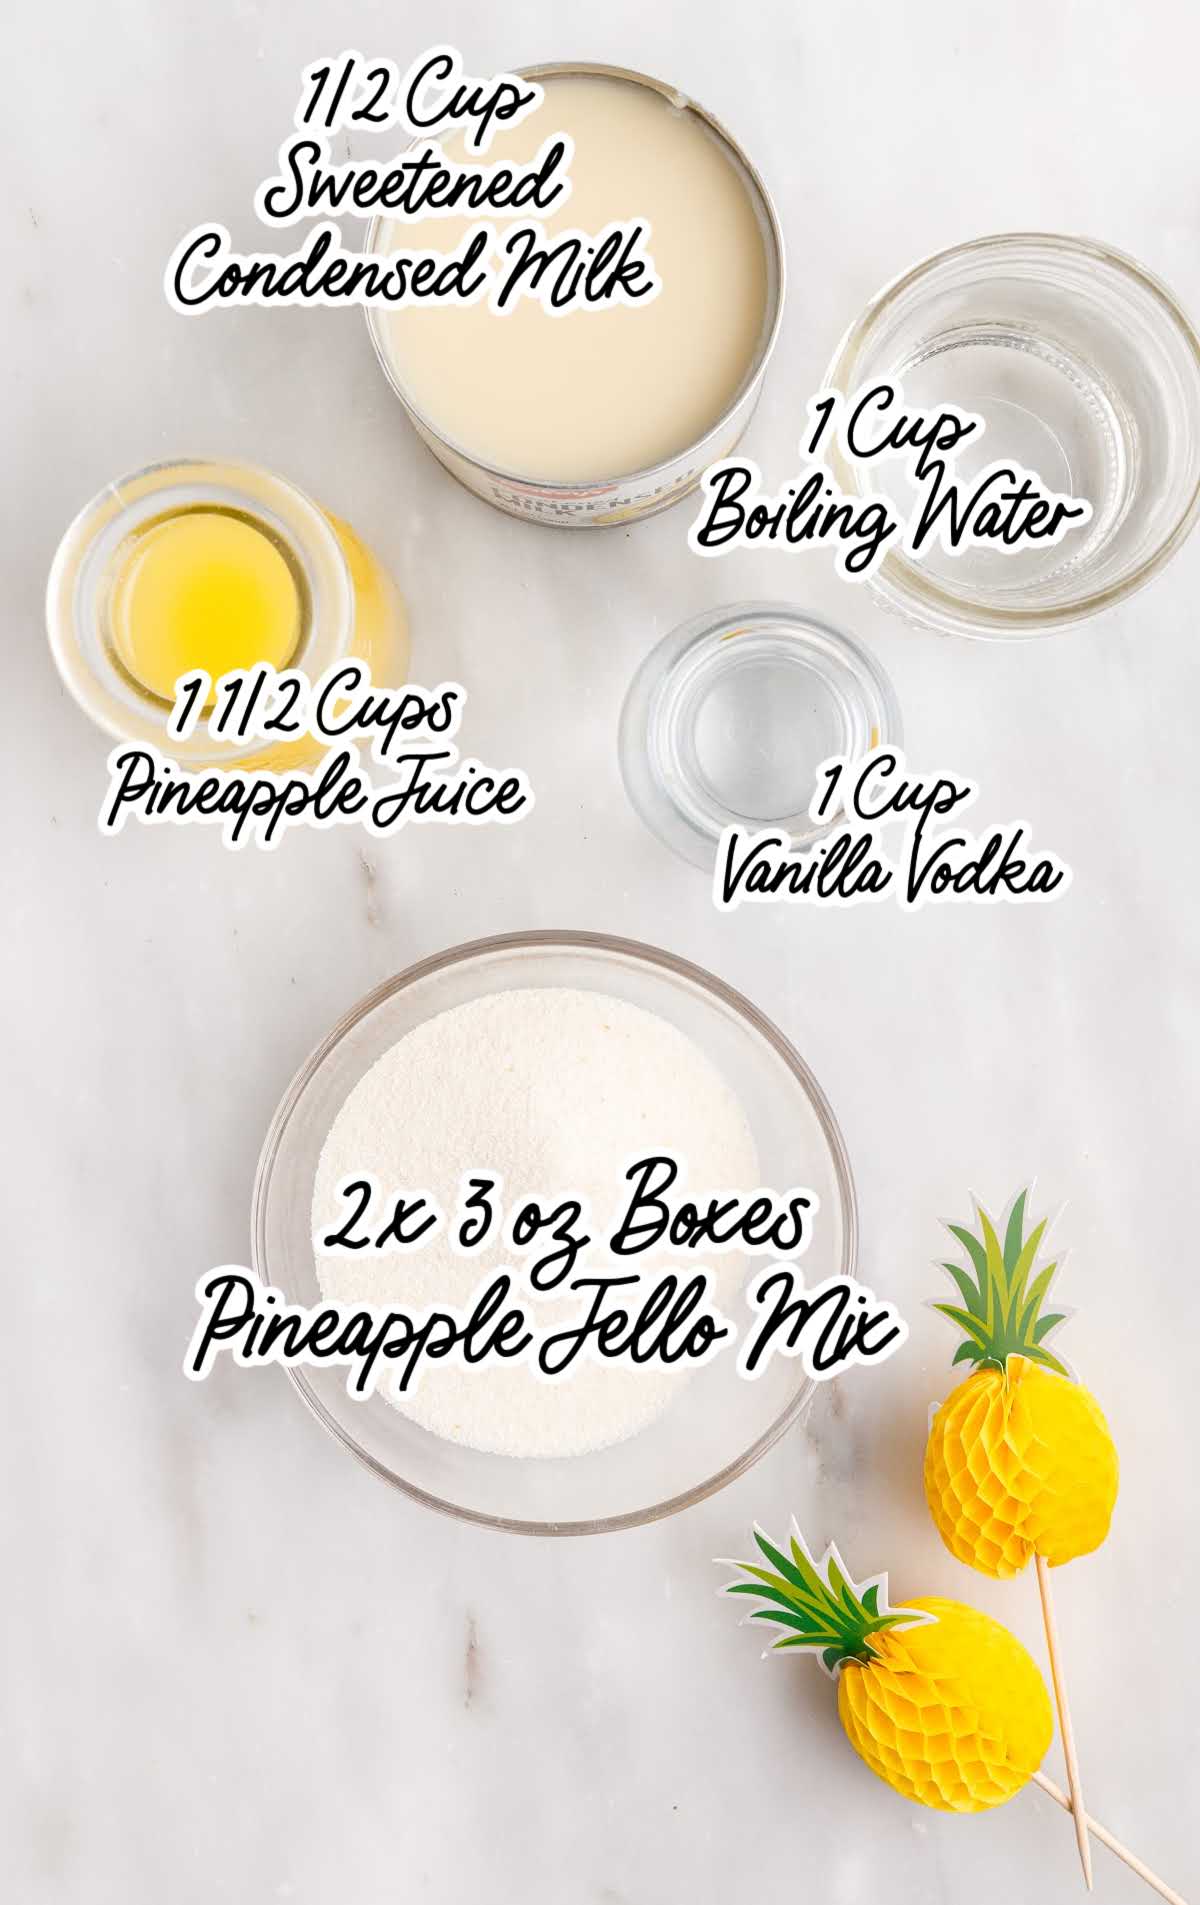 Dole Whip Jello Shots raw ingredients that are labeled